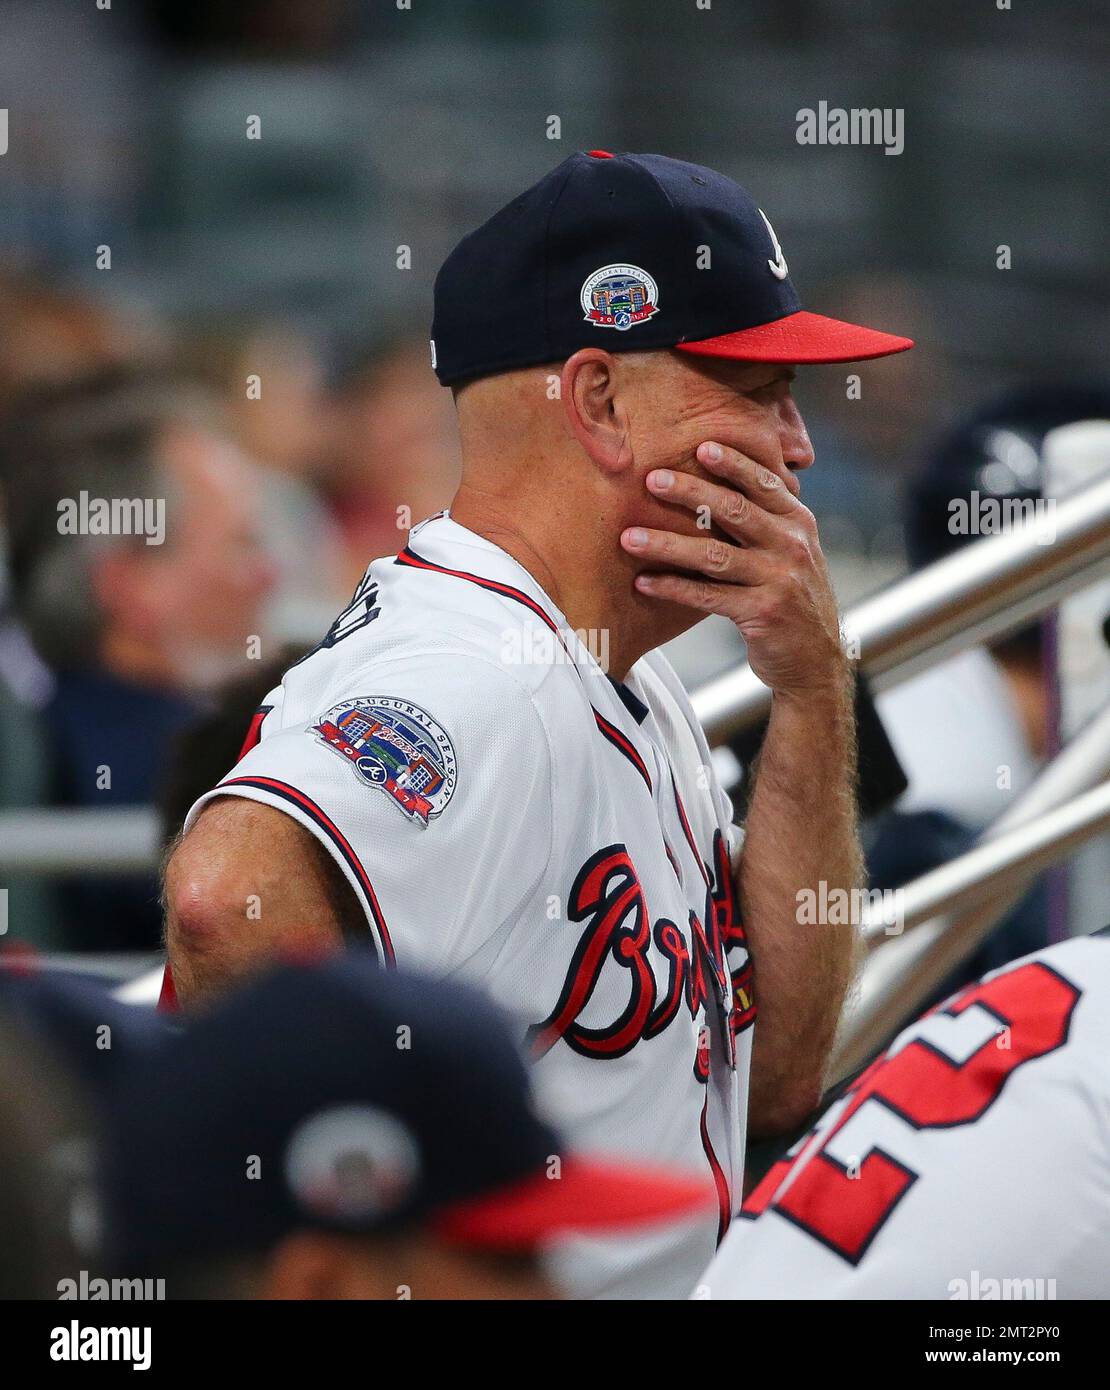 Atlanta Braves manager Brian Snitker watches from the dugout during the  team's baseball game against the